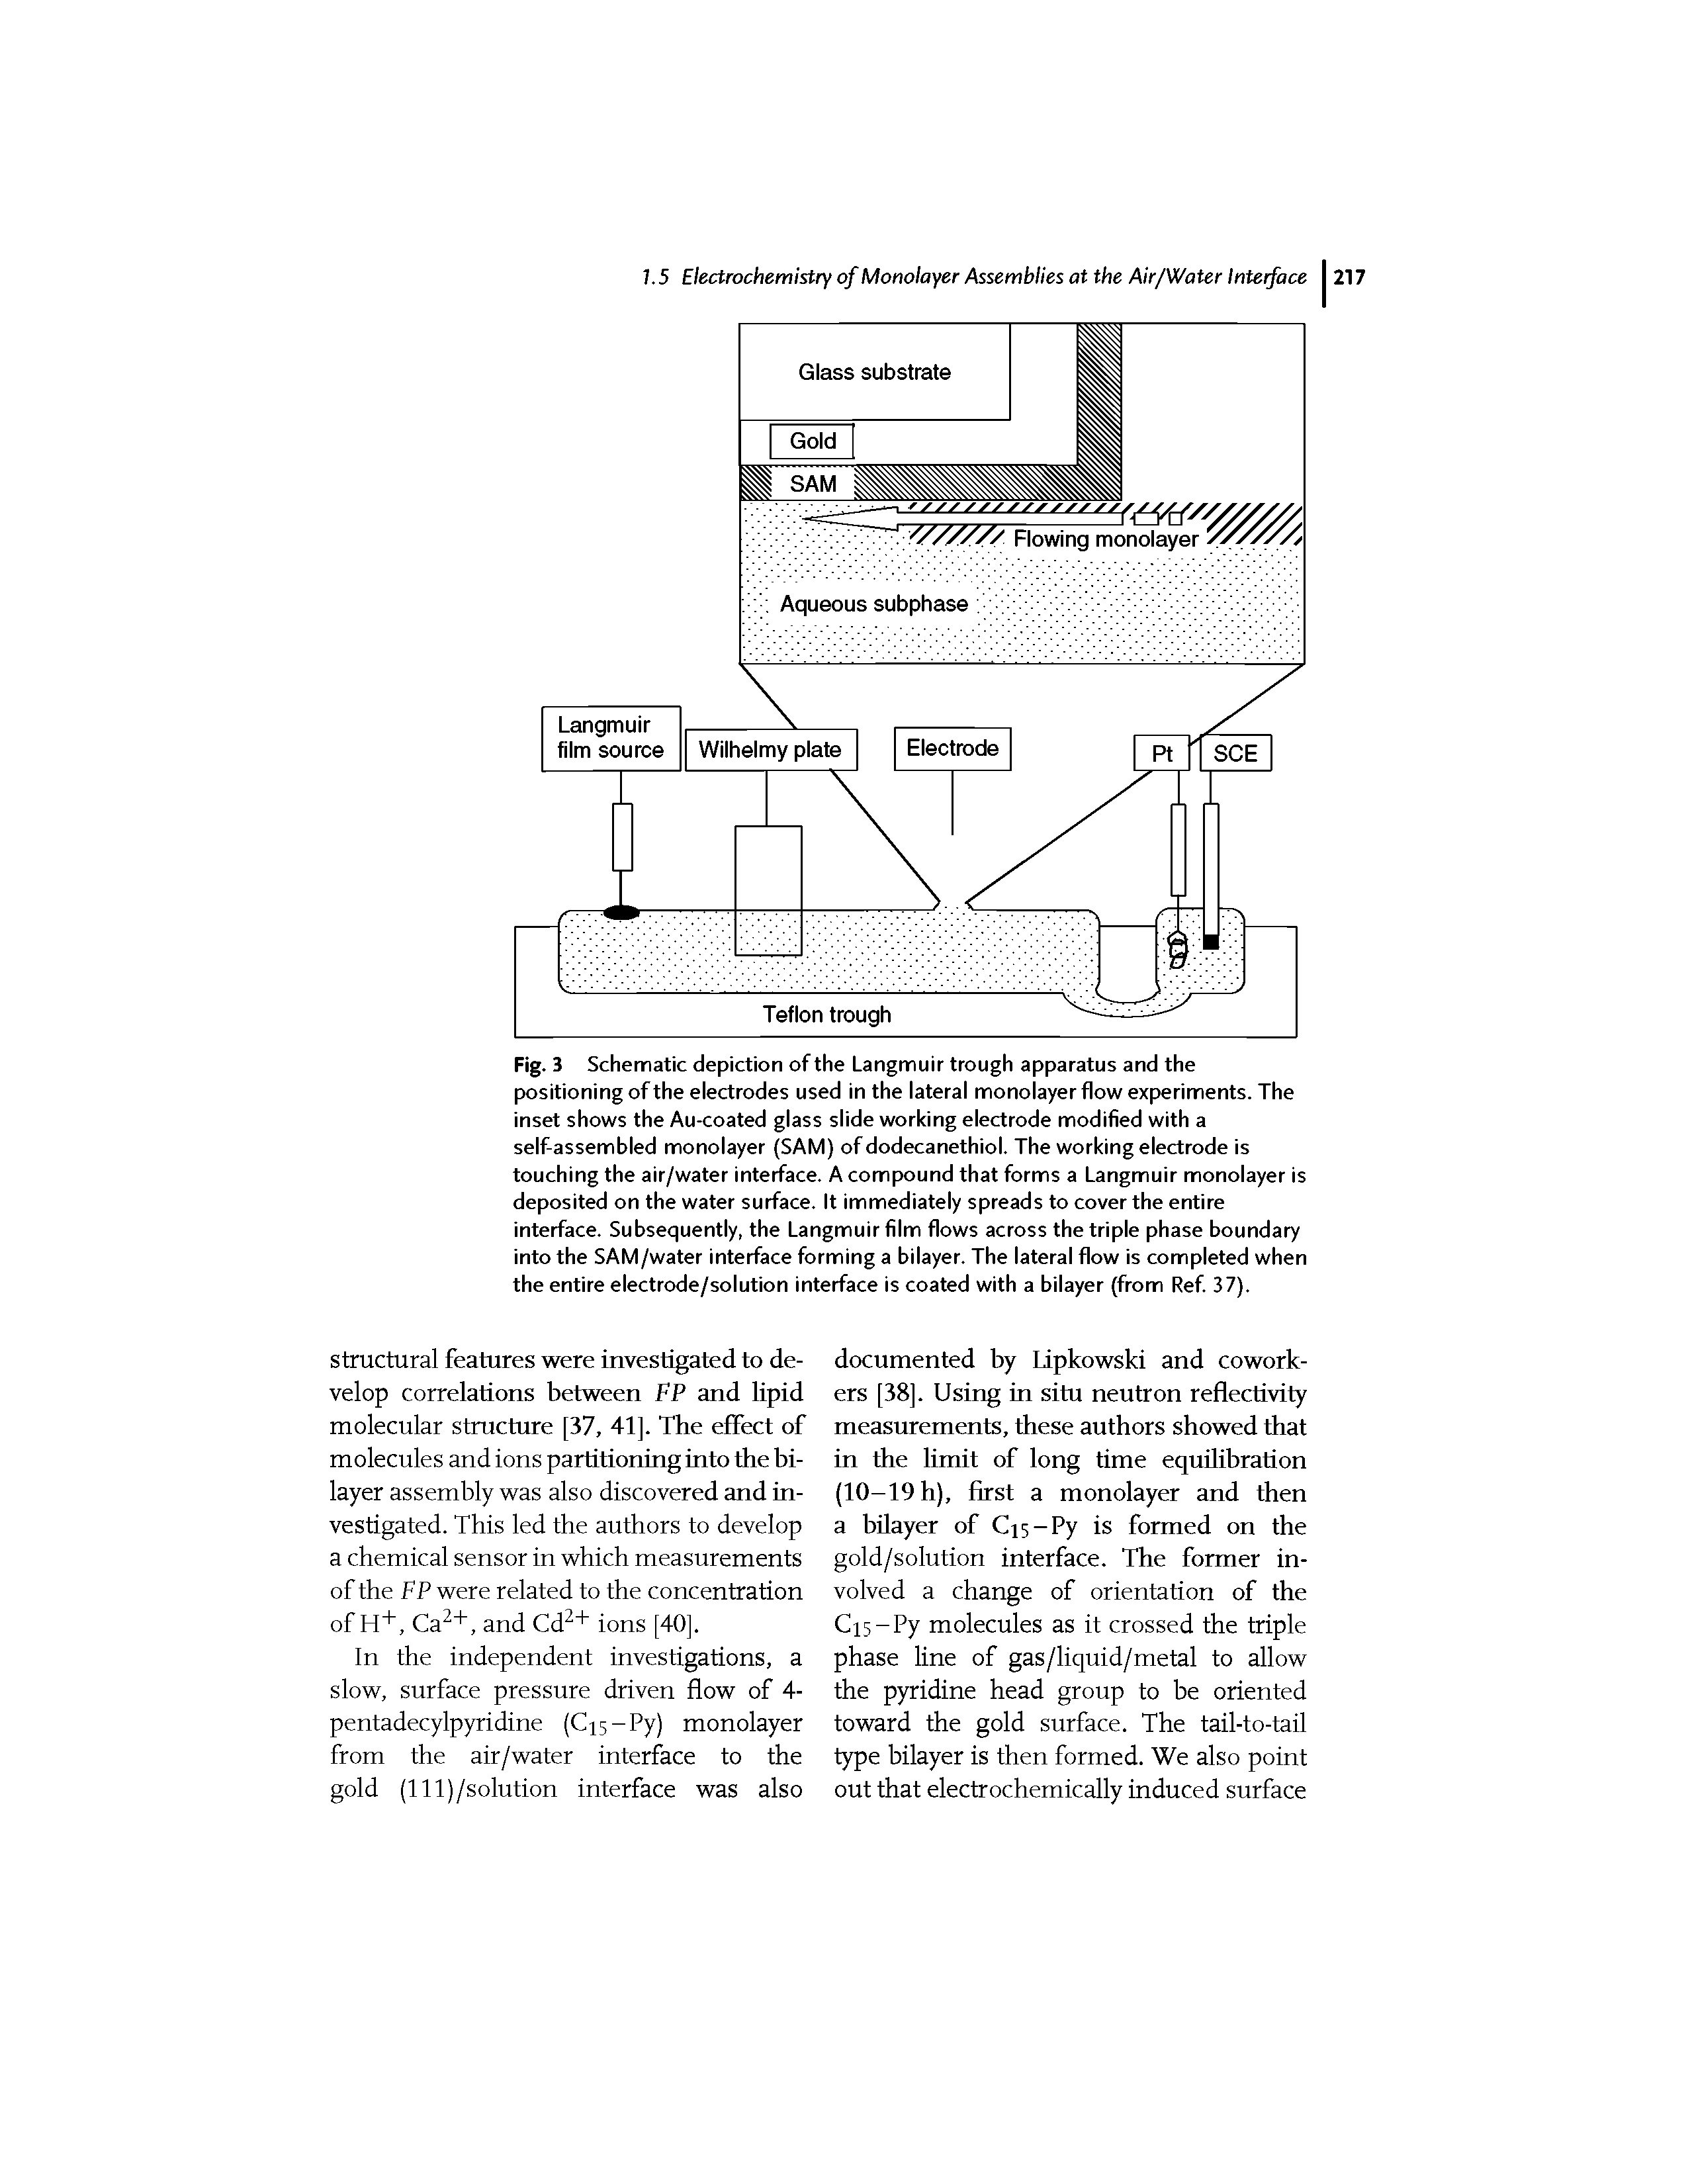 Fig. 3 Schematic depiction of the Langmuir trough apparatus and the positioning of the electrodes used in the lateral monolayer flow experiments. The inset shows the Au-coated glass slide working electrode modified with a self-assembled monolayer (SAM) of dodecanethiol. The working electrode is touching the air/water interface. A compound that forms a Langmuir monolayer is deposited on the water surface. It immediately spreads to cover the entire interface. Subsequently, the Langmuir film flows across the triple phase boundary into the SAM/water interface forming a bilayer. The lateral flow is completed when the entire electrode/solution interface is coated with a bilayer (from Ref 37).